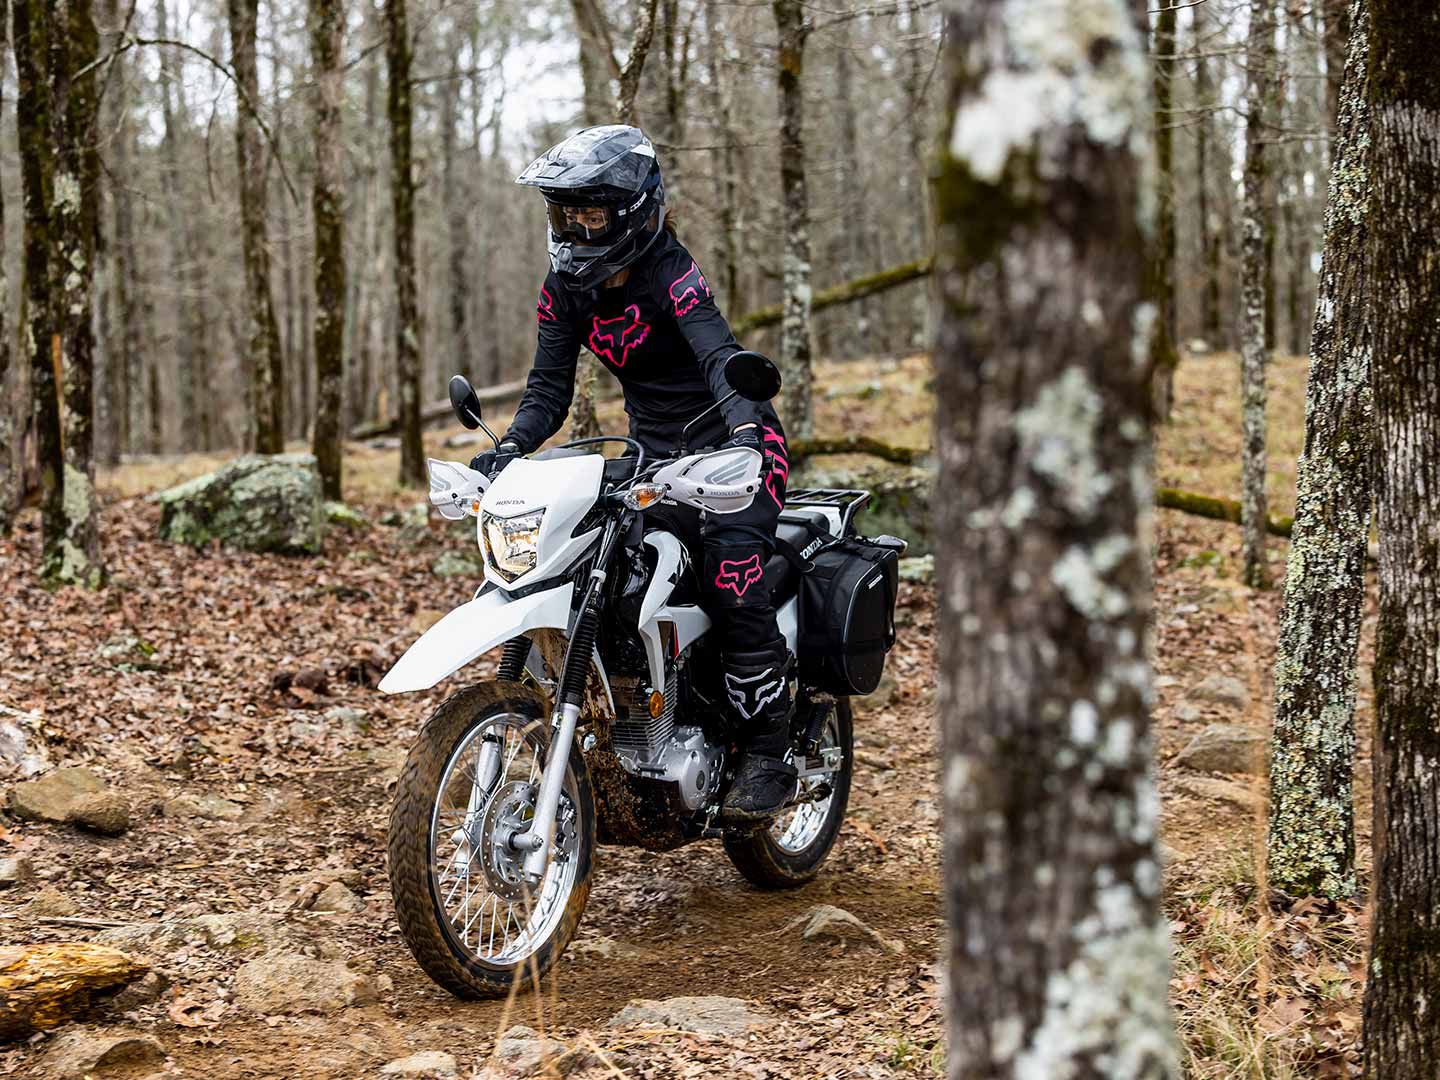 Honda has announced the new 2023 XR150L dual sport. Great, because the spring riding season is just around the corner.